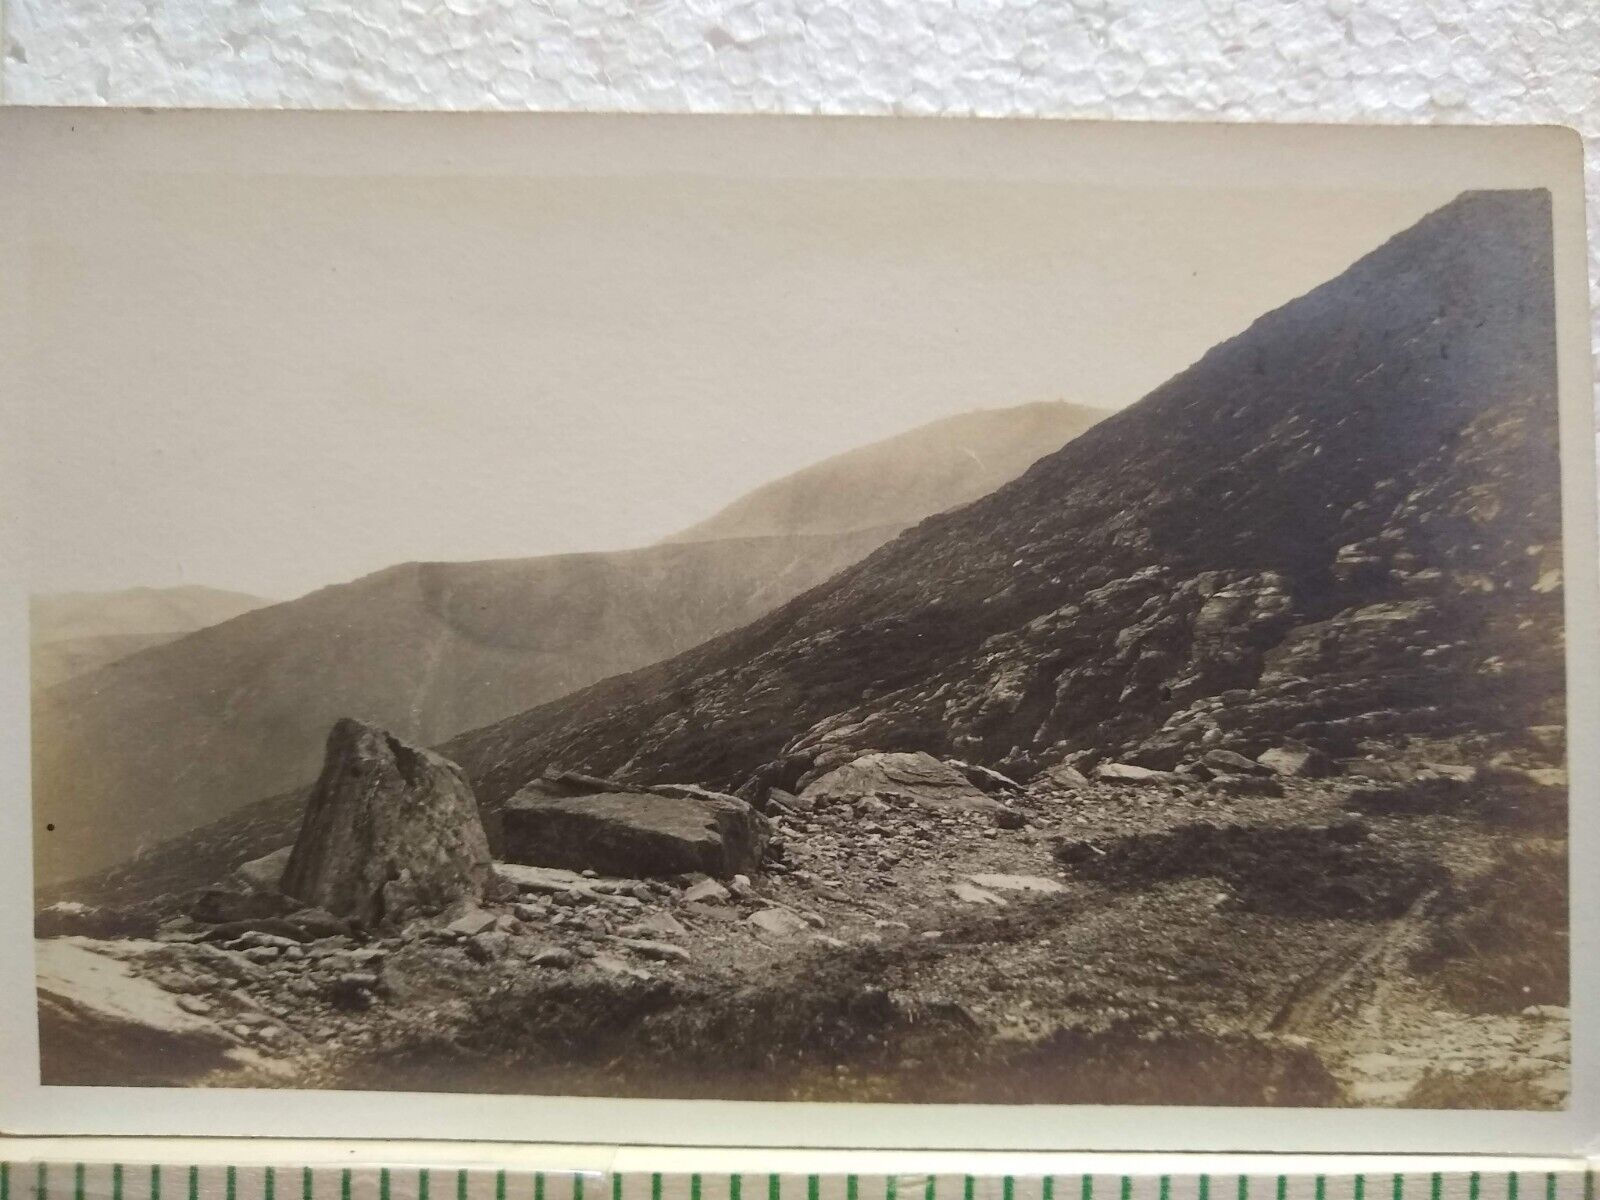 Postcard Vintage/Old Picture of a Mountain/Landscape Scene RPPC